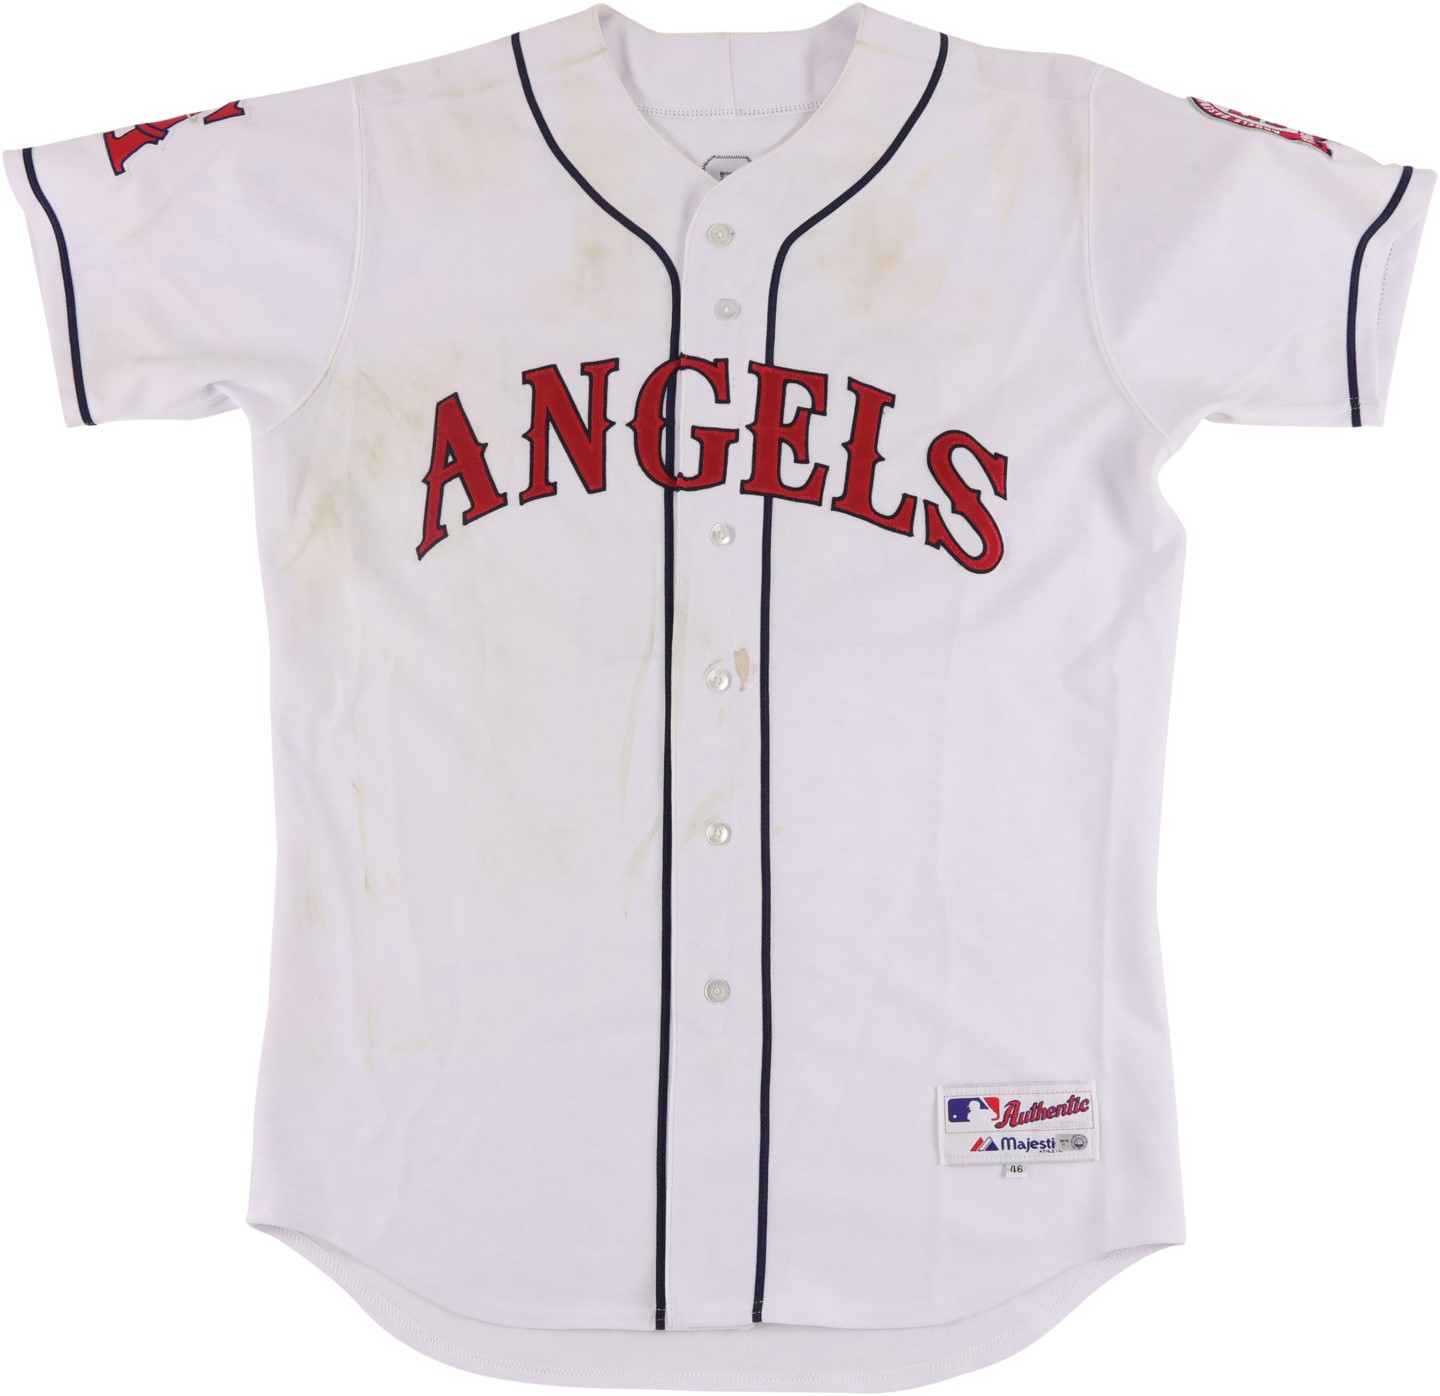 Baseball Equipment - 2011 Mike Trout Anaheim Angels Major League Debut Game Worn Jersey (Sports Investors Photo-Matching LOA & MLB Authenticated)